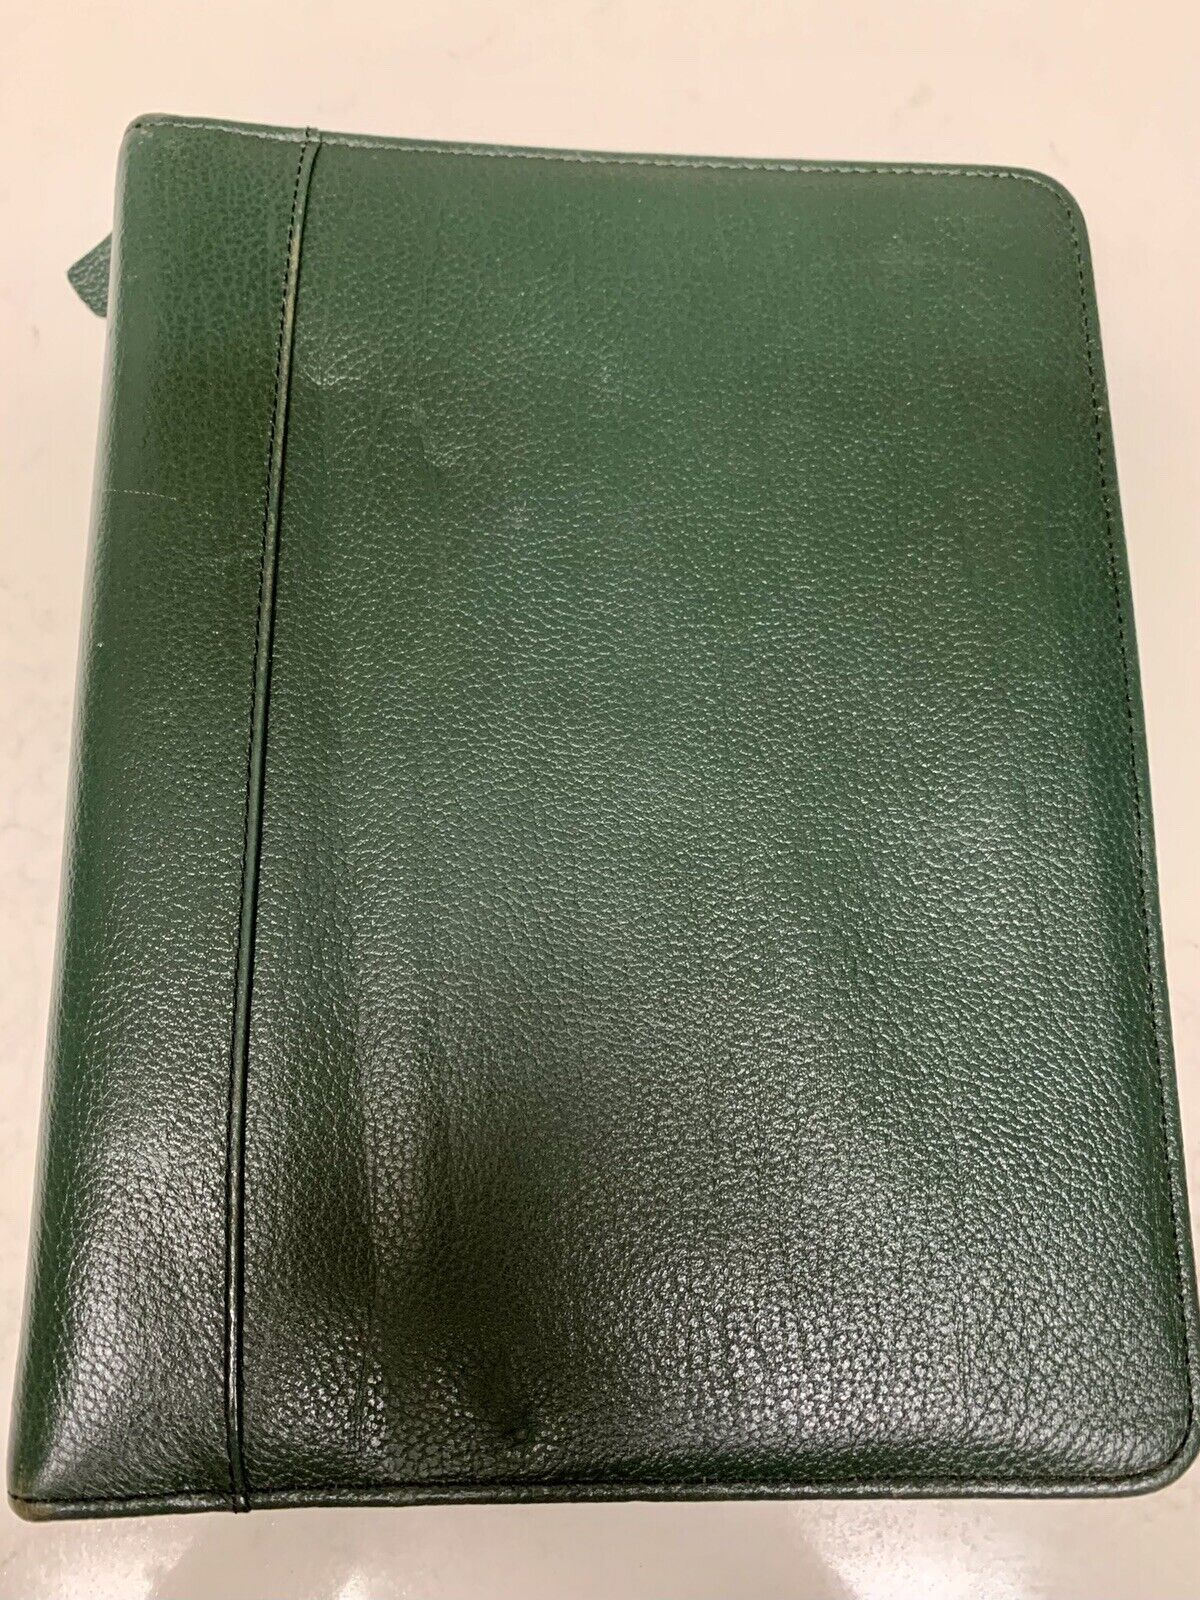 Vtg Franklin Quest Planner Green Leather 7 Ring 10.5”x8” Zipper USA Made #11564